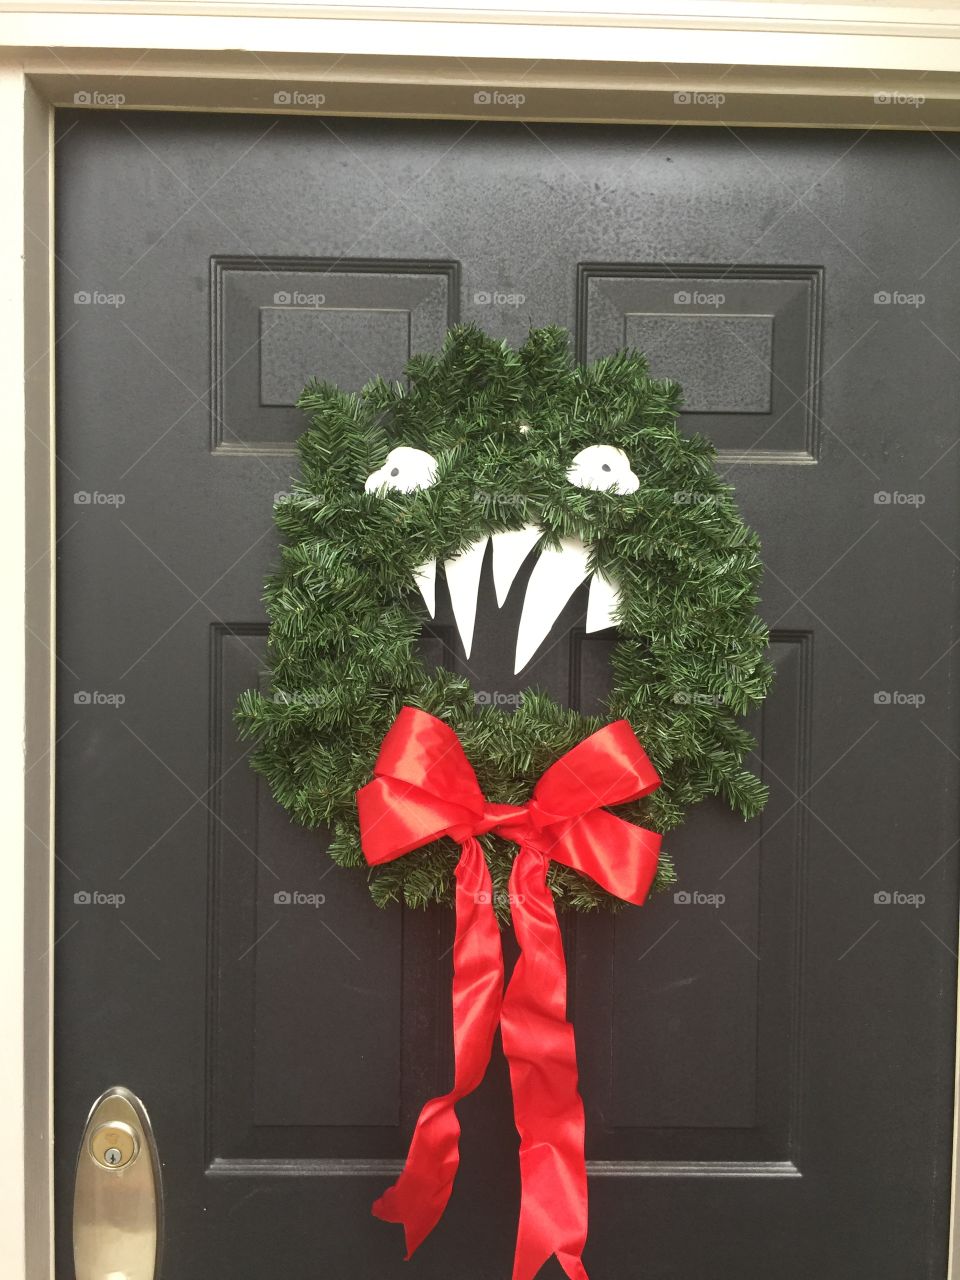 That's one scary wreath